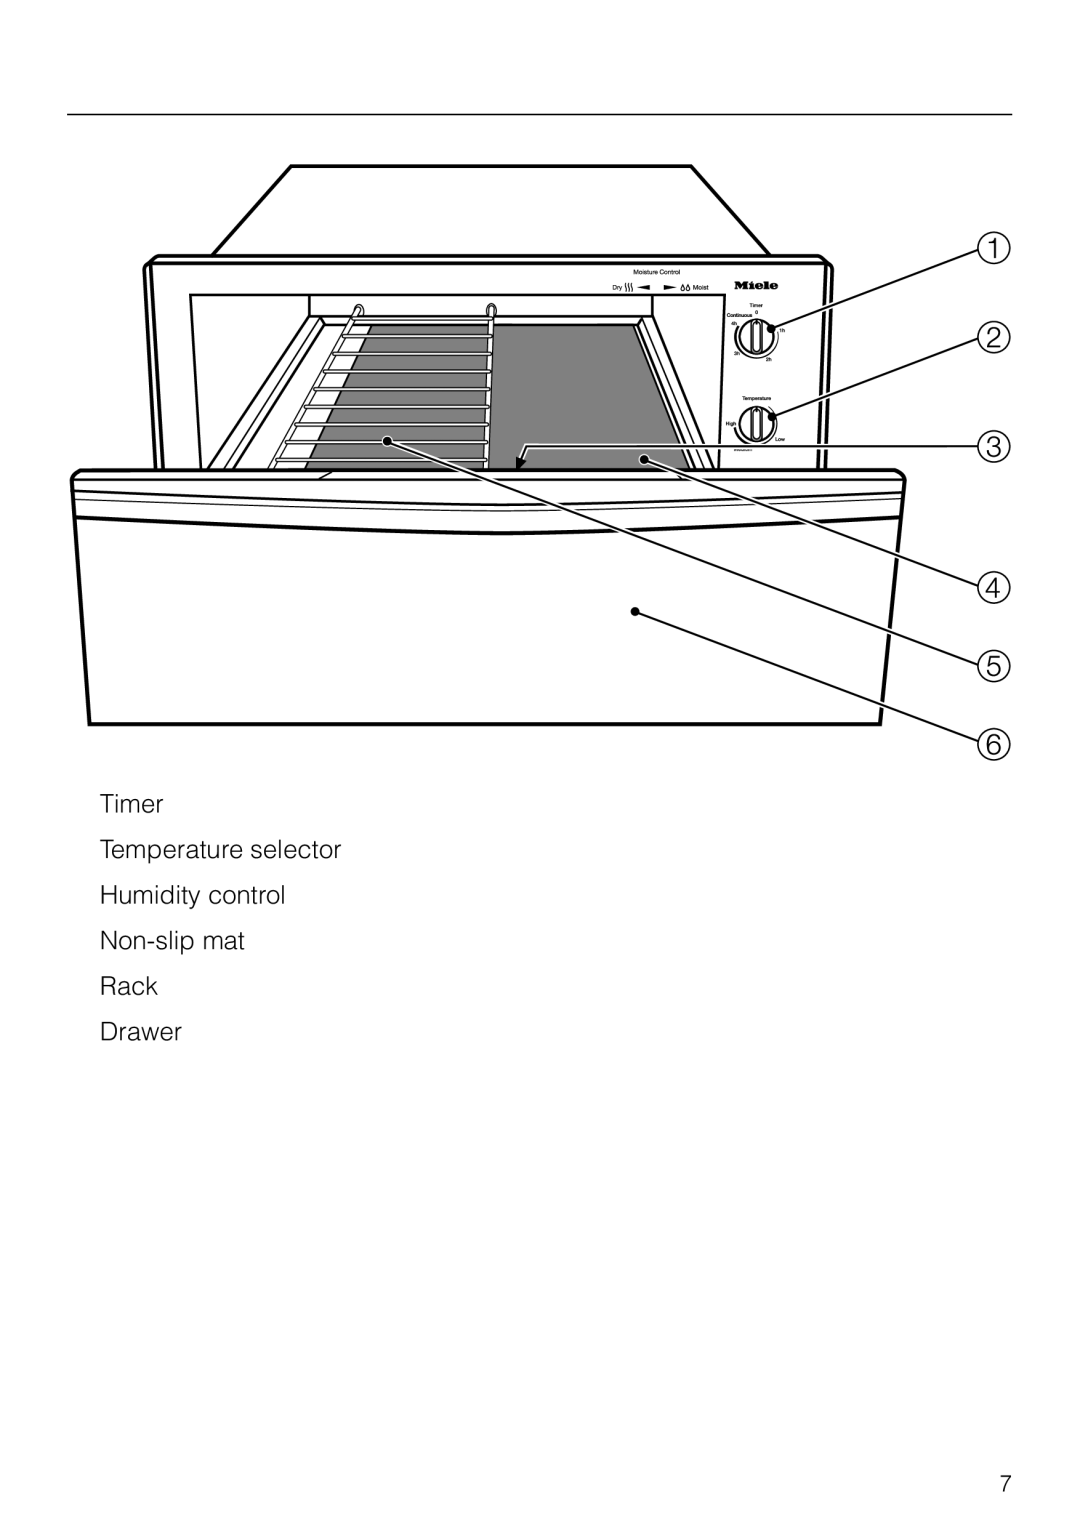 Miele ESW760-25, ESW761-25, ESW700-25 manual Guide to the warming drawer 